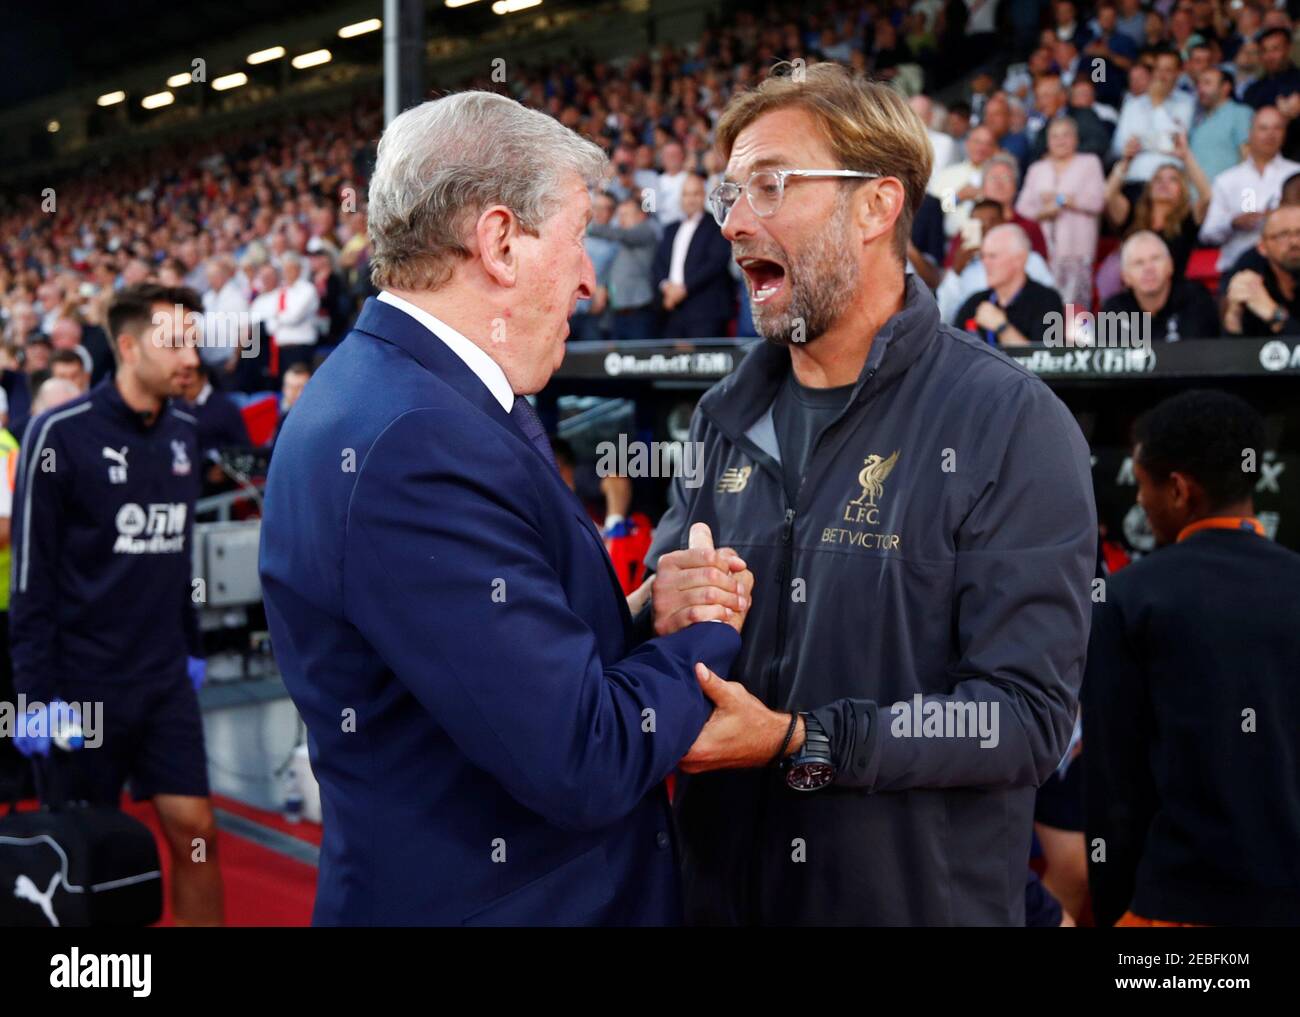 Soccer Football - Premier League - Crystal Palace v Liverpool - Selhurst Park, London, Britain - August 20, 2018  Crystal Palace manager Roy Hodgson with Liverpool manager Juergen Klopp before the match             REUTERS/Eddie Keogh  EDITORIAL USE ONLY. No use with unauthorized audio, video, data, fixture lists, club/league logos or 'live' services. Online in-match use limited to 75 images, no video emulation. No use in betting, games or single club/league/player publications.  Please contact your account representative for further details. Stock Photo